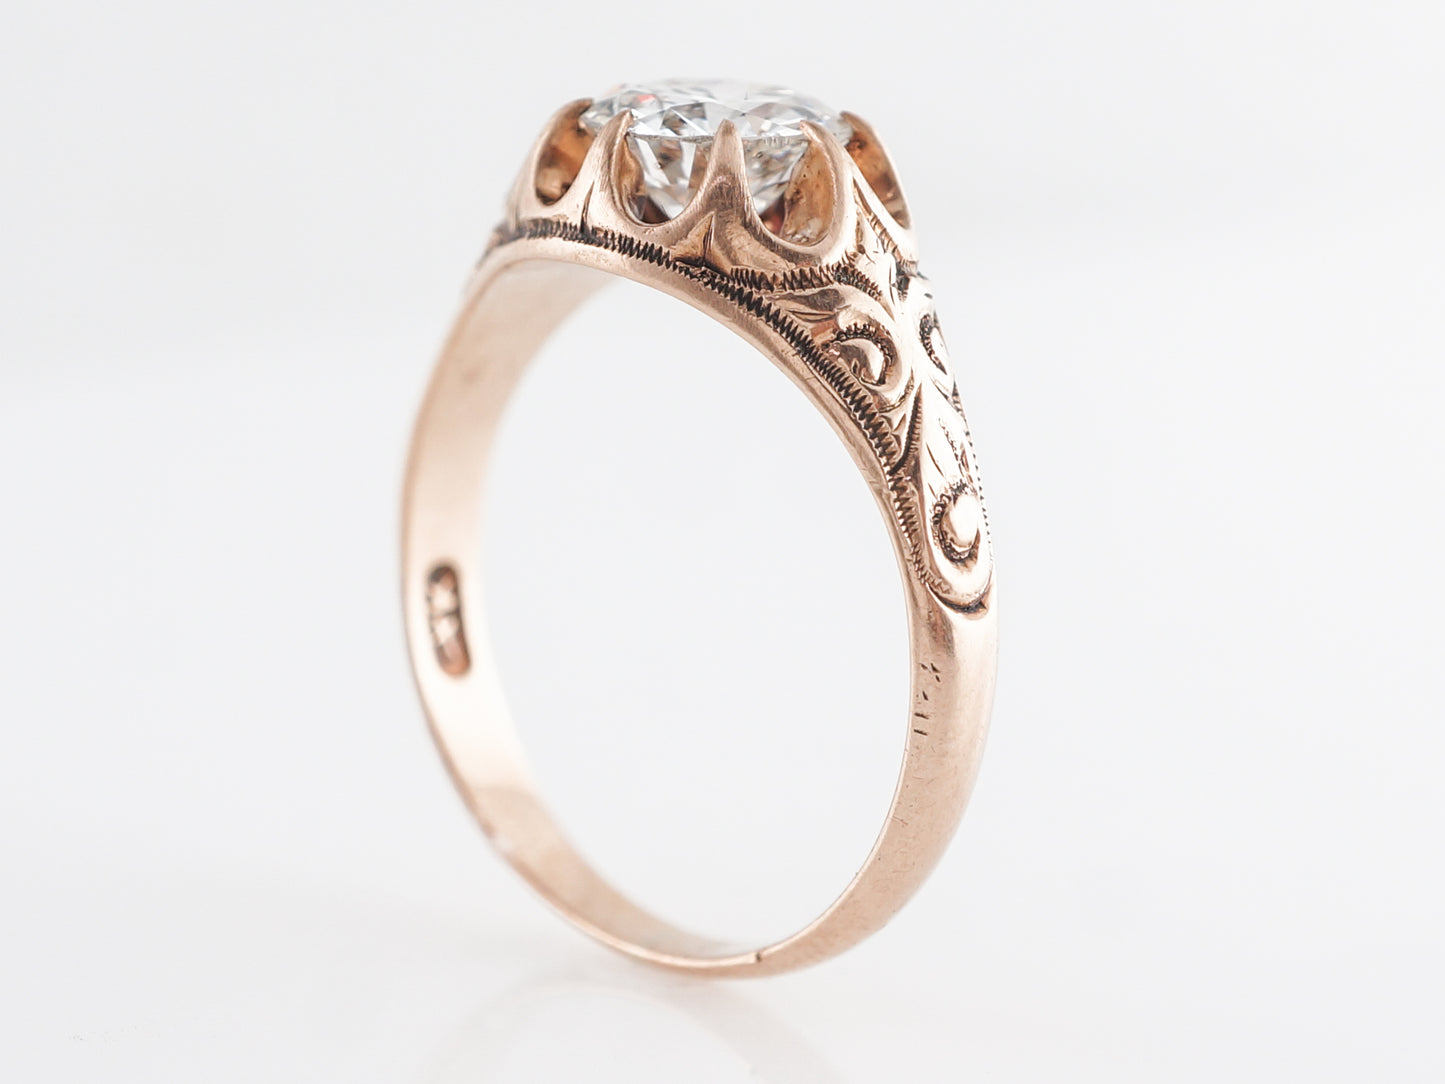 Vintage Victorian European Cut Engagement Ring in Rose Gold